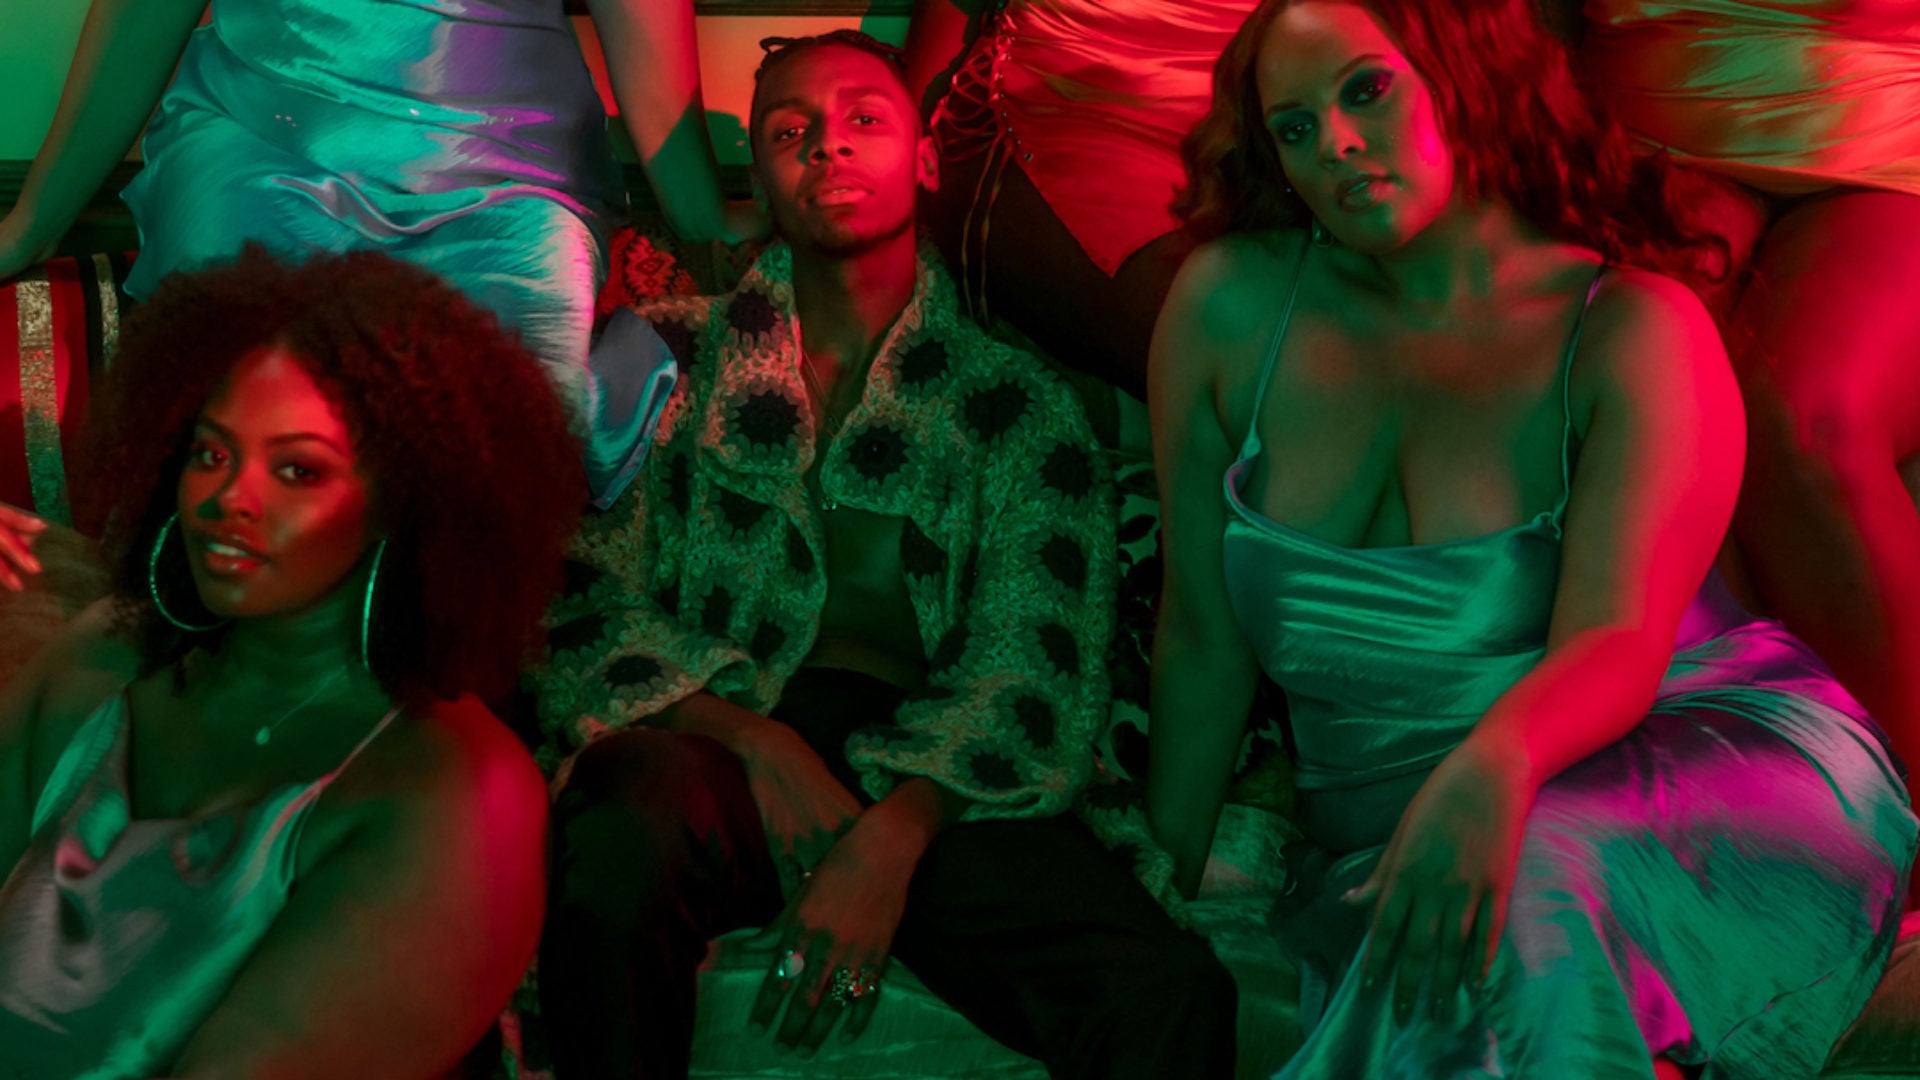 Premiere: Masego Celebrates Curvy Women With Thumping Neon 'Big Girls' Video